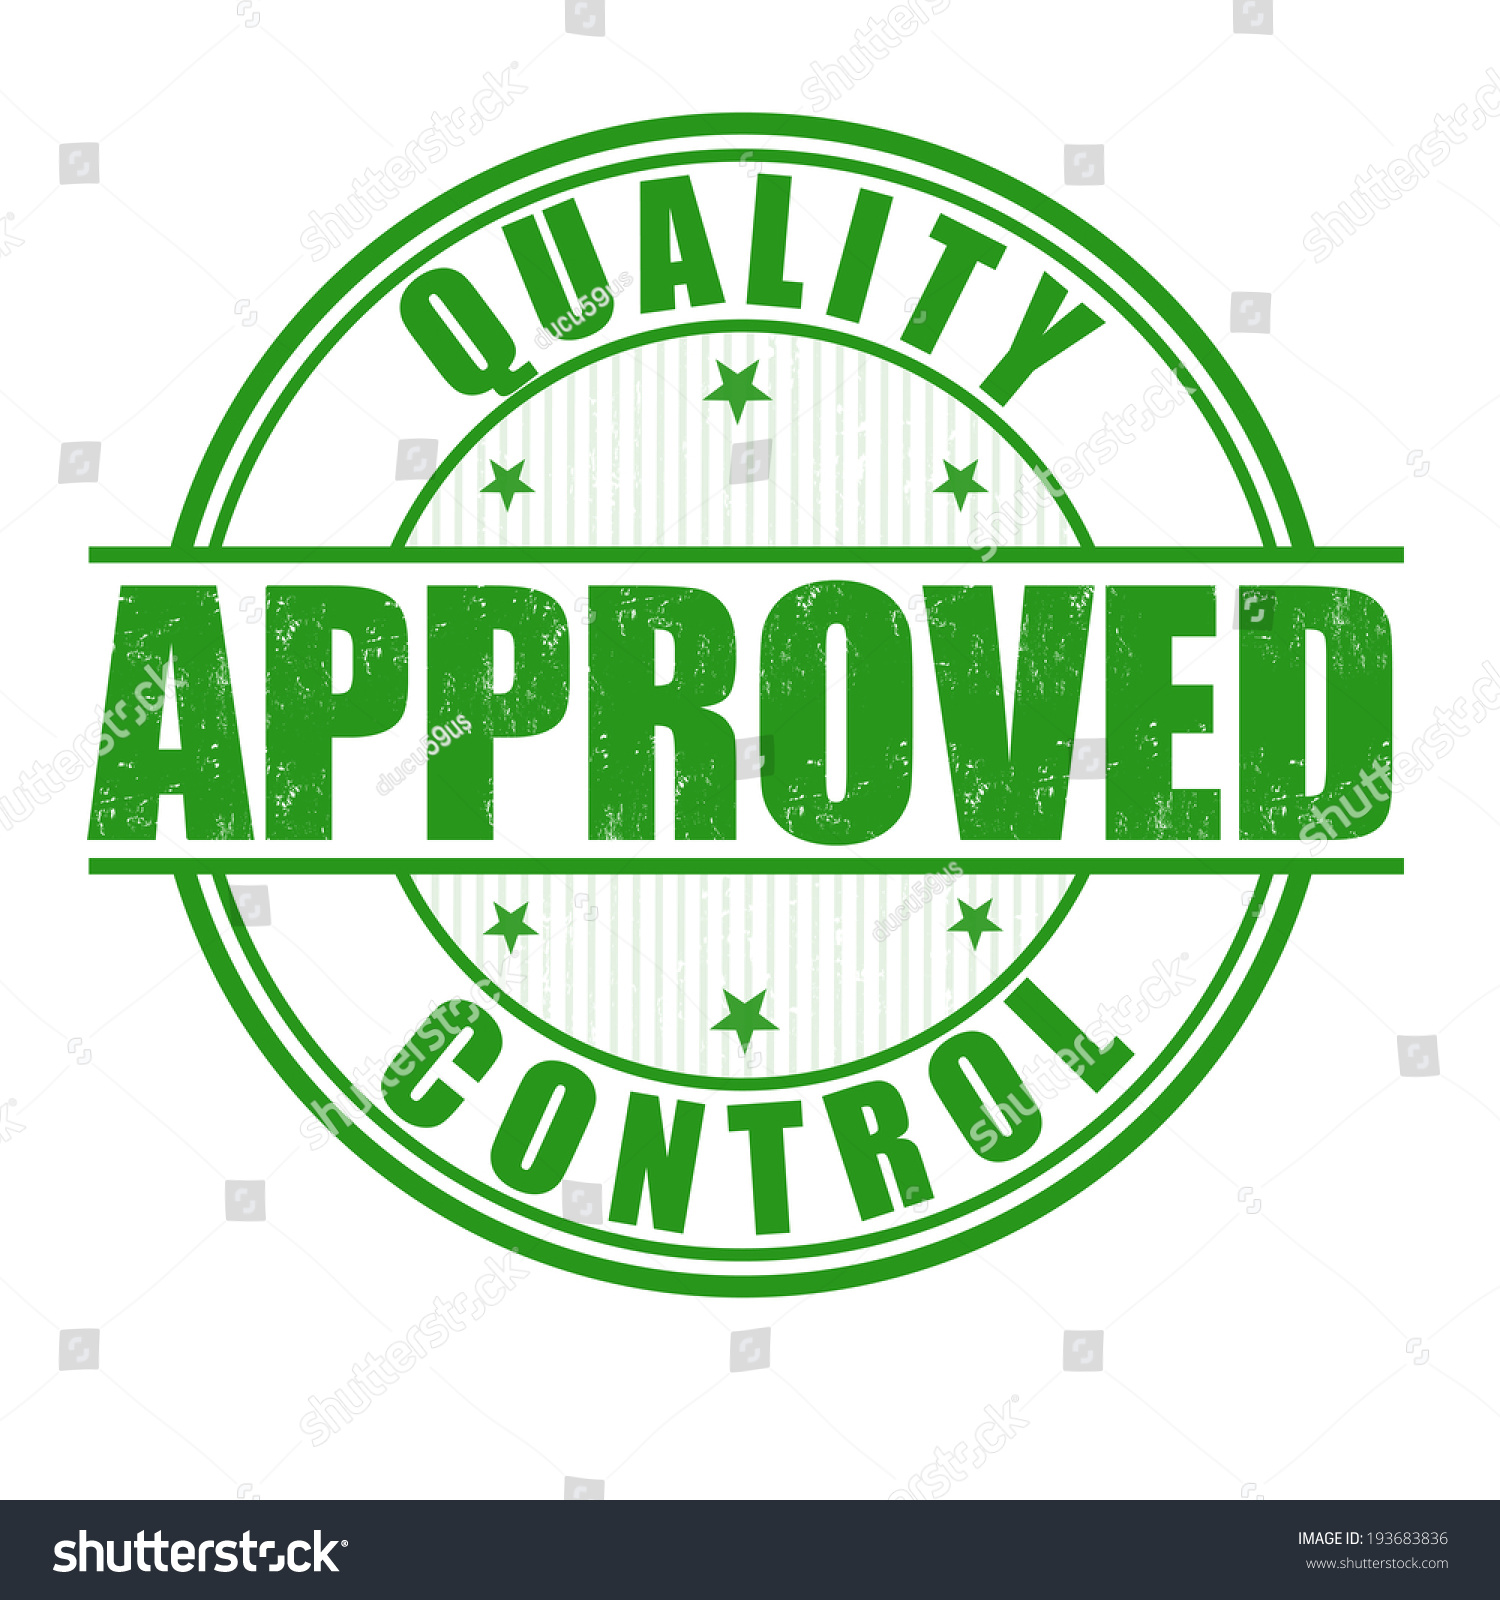 clipart for quality control - photo #21